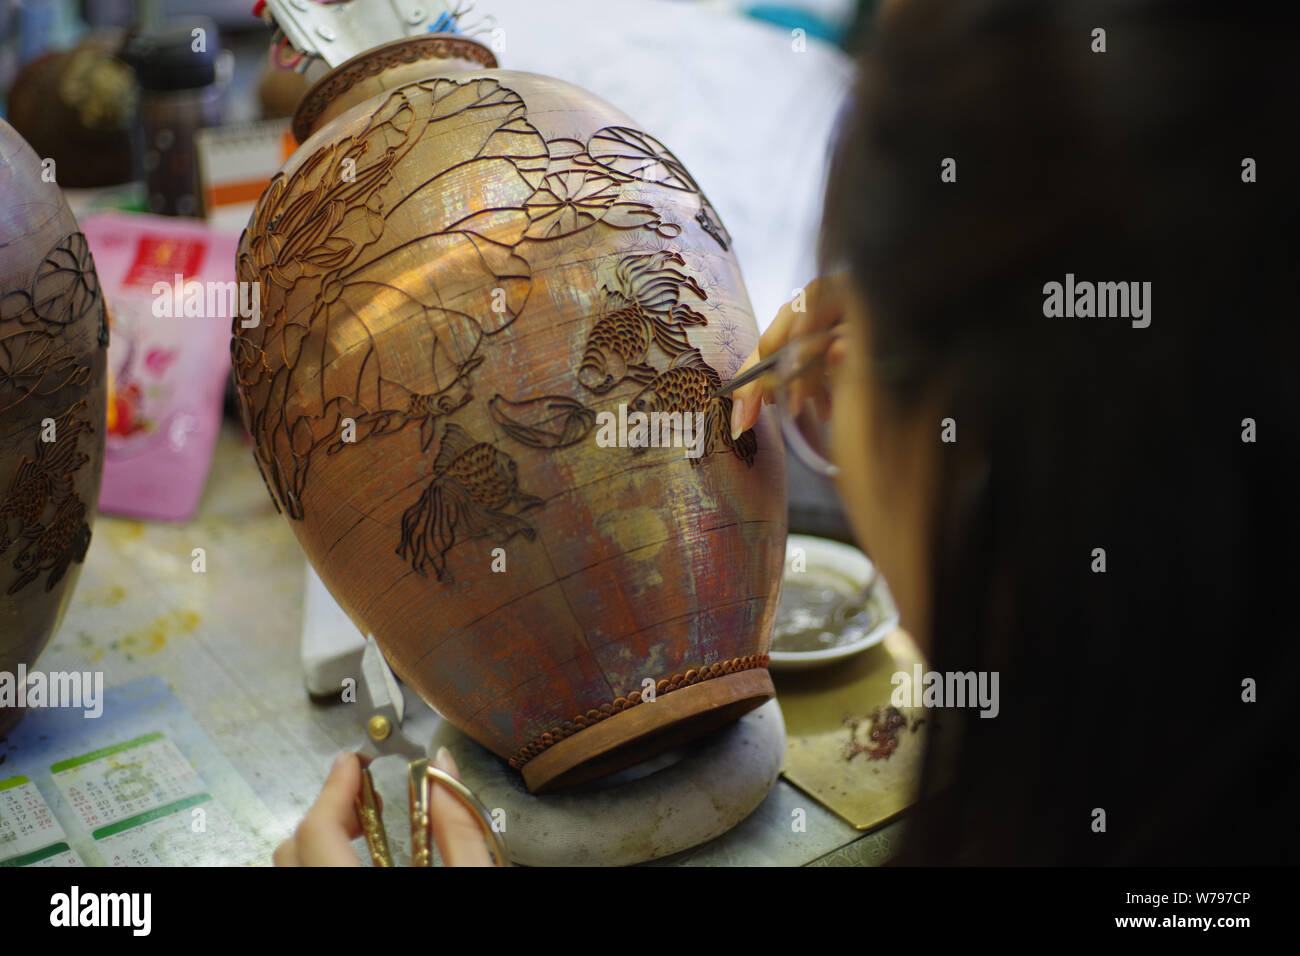 A Chinese worker adds cloisons according to the pattern previously transferred to a cloisonne artwork in the biggest cloisonne factory, Beijing Enamel Stock Photo